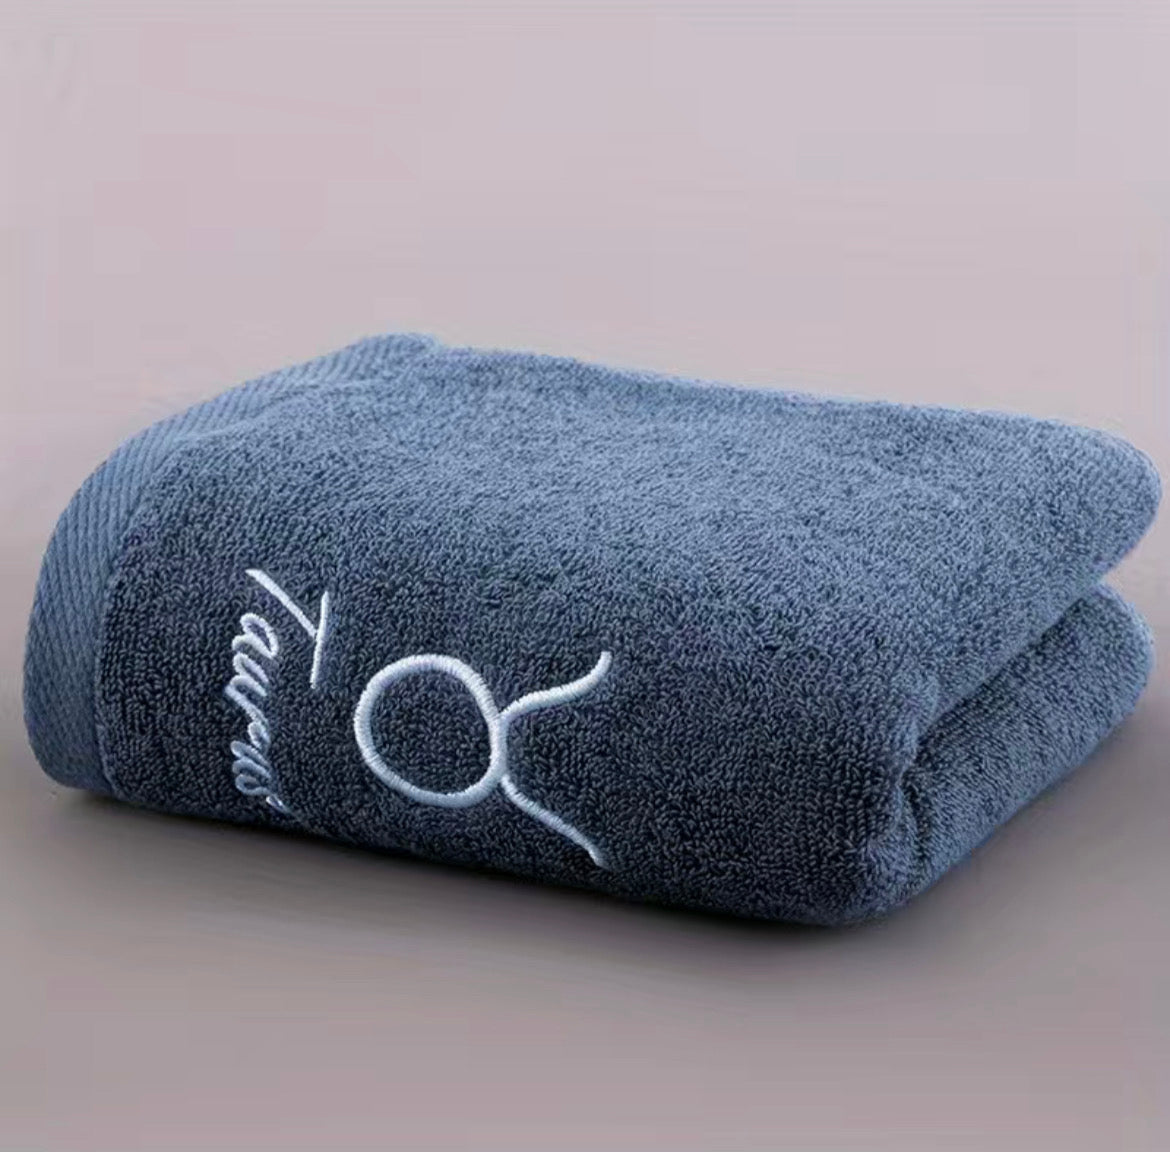 Embroidered Zodiac Face Towel.